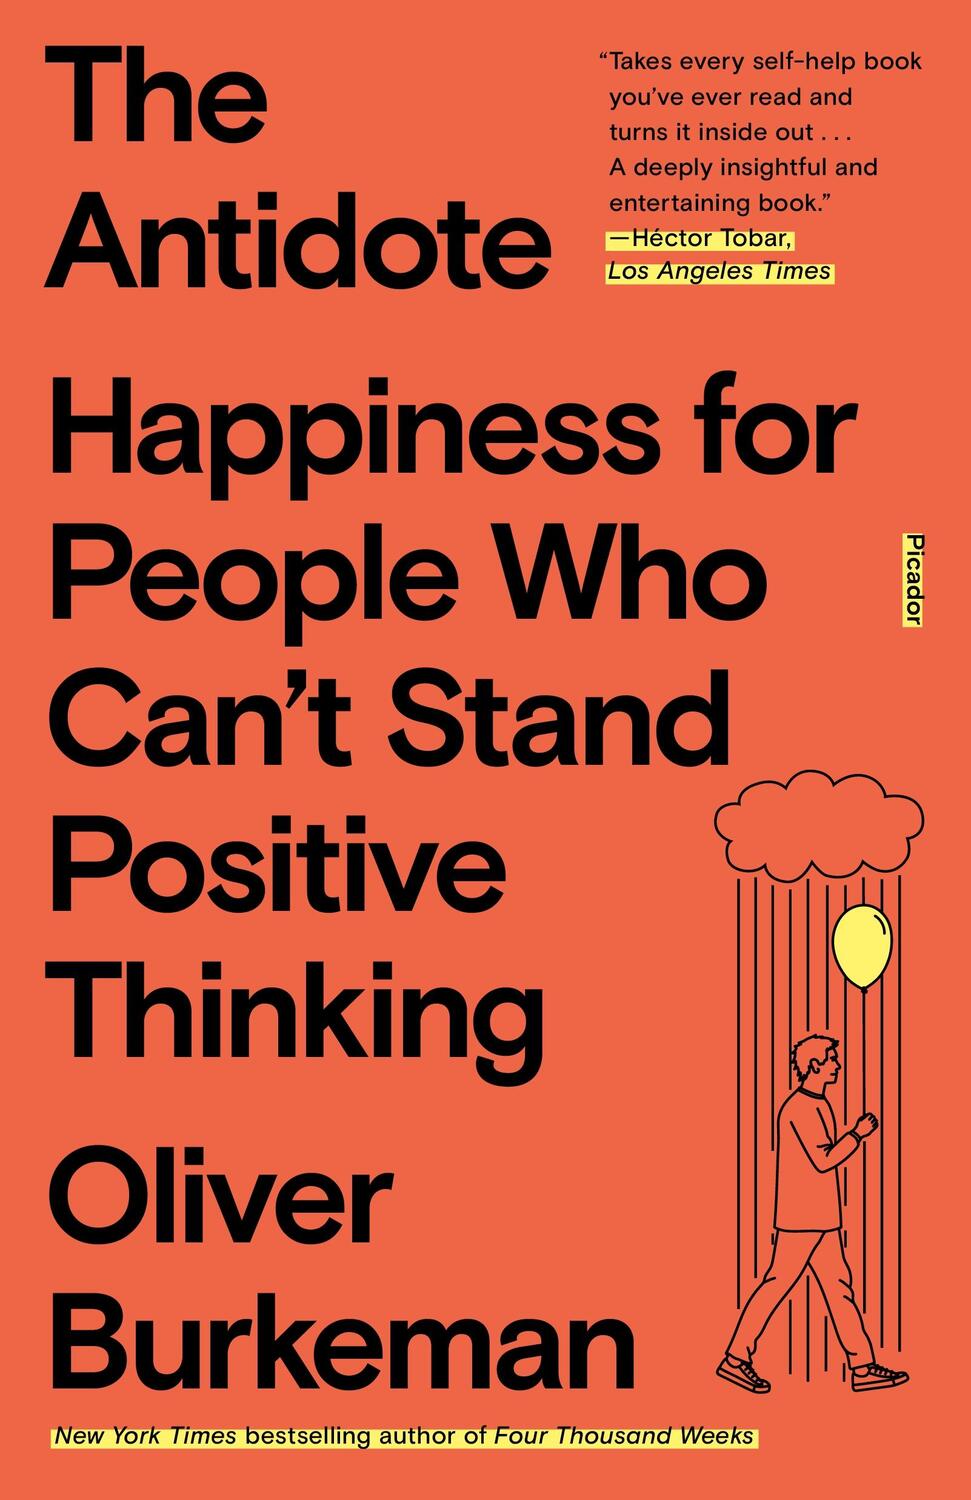 Autor: 9781250860408 | The Antidote | Happiness for People Who Can't Stand Positive Thinking